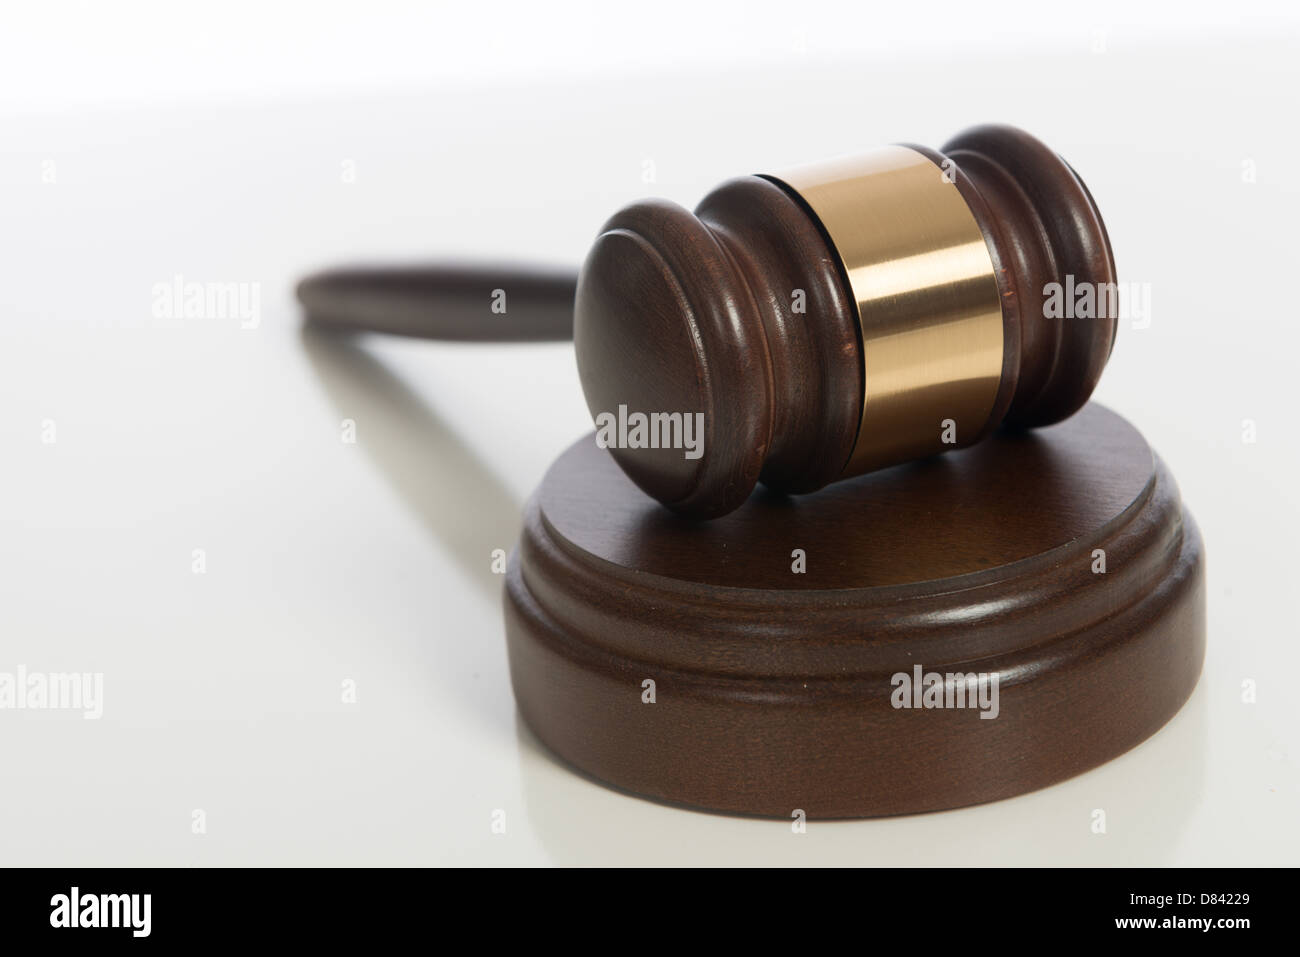 A brown wooden judge's gavel on a white background Stock Photo